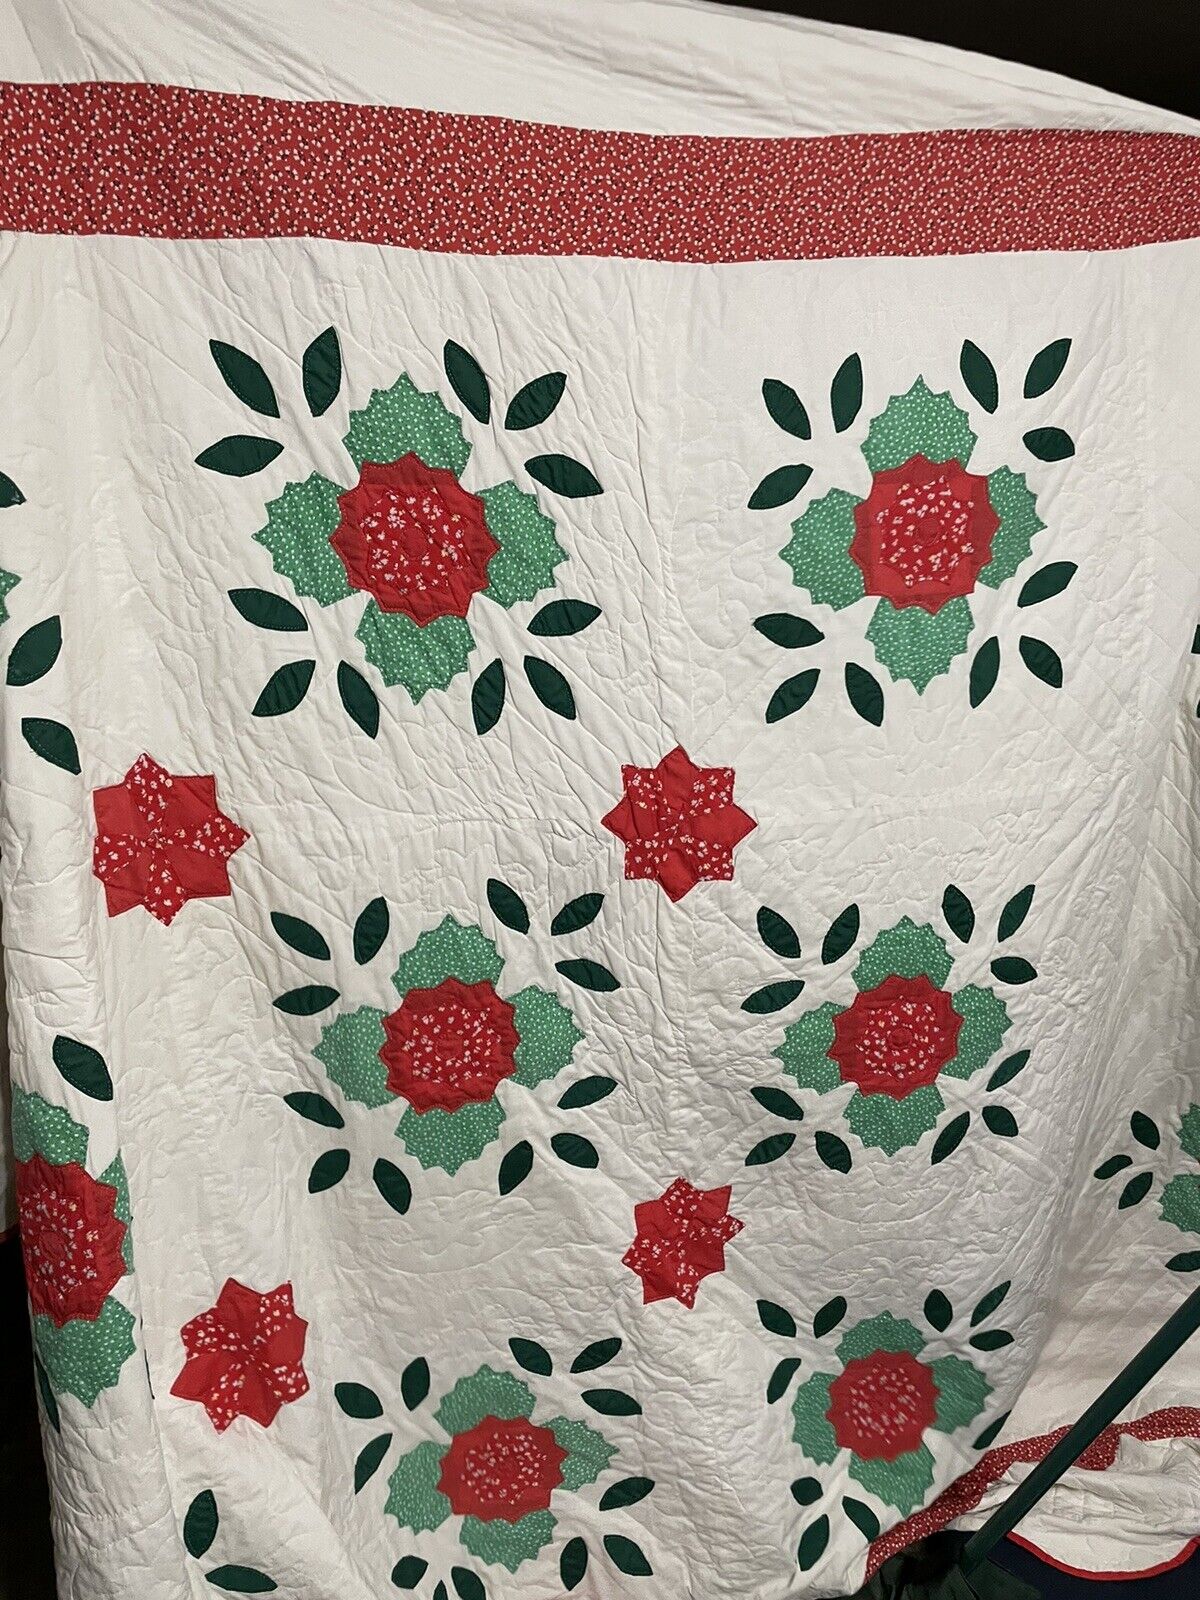 Antique Floral Quilt Vintage With Scalloped Edge - Floral Quilting